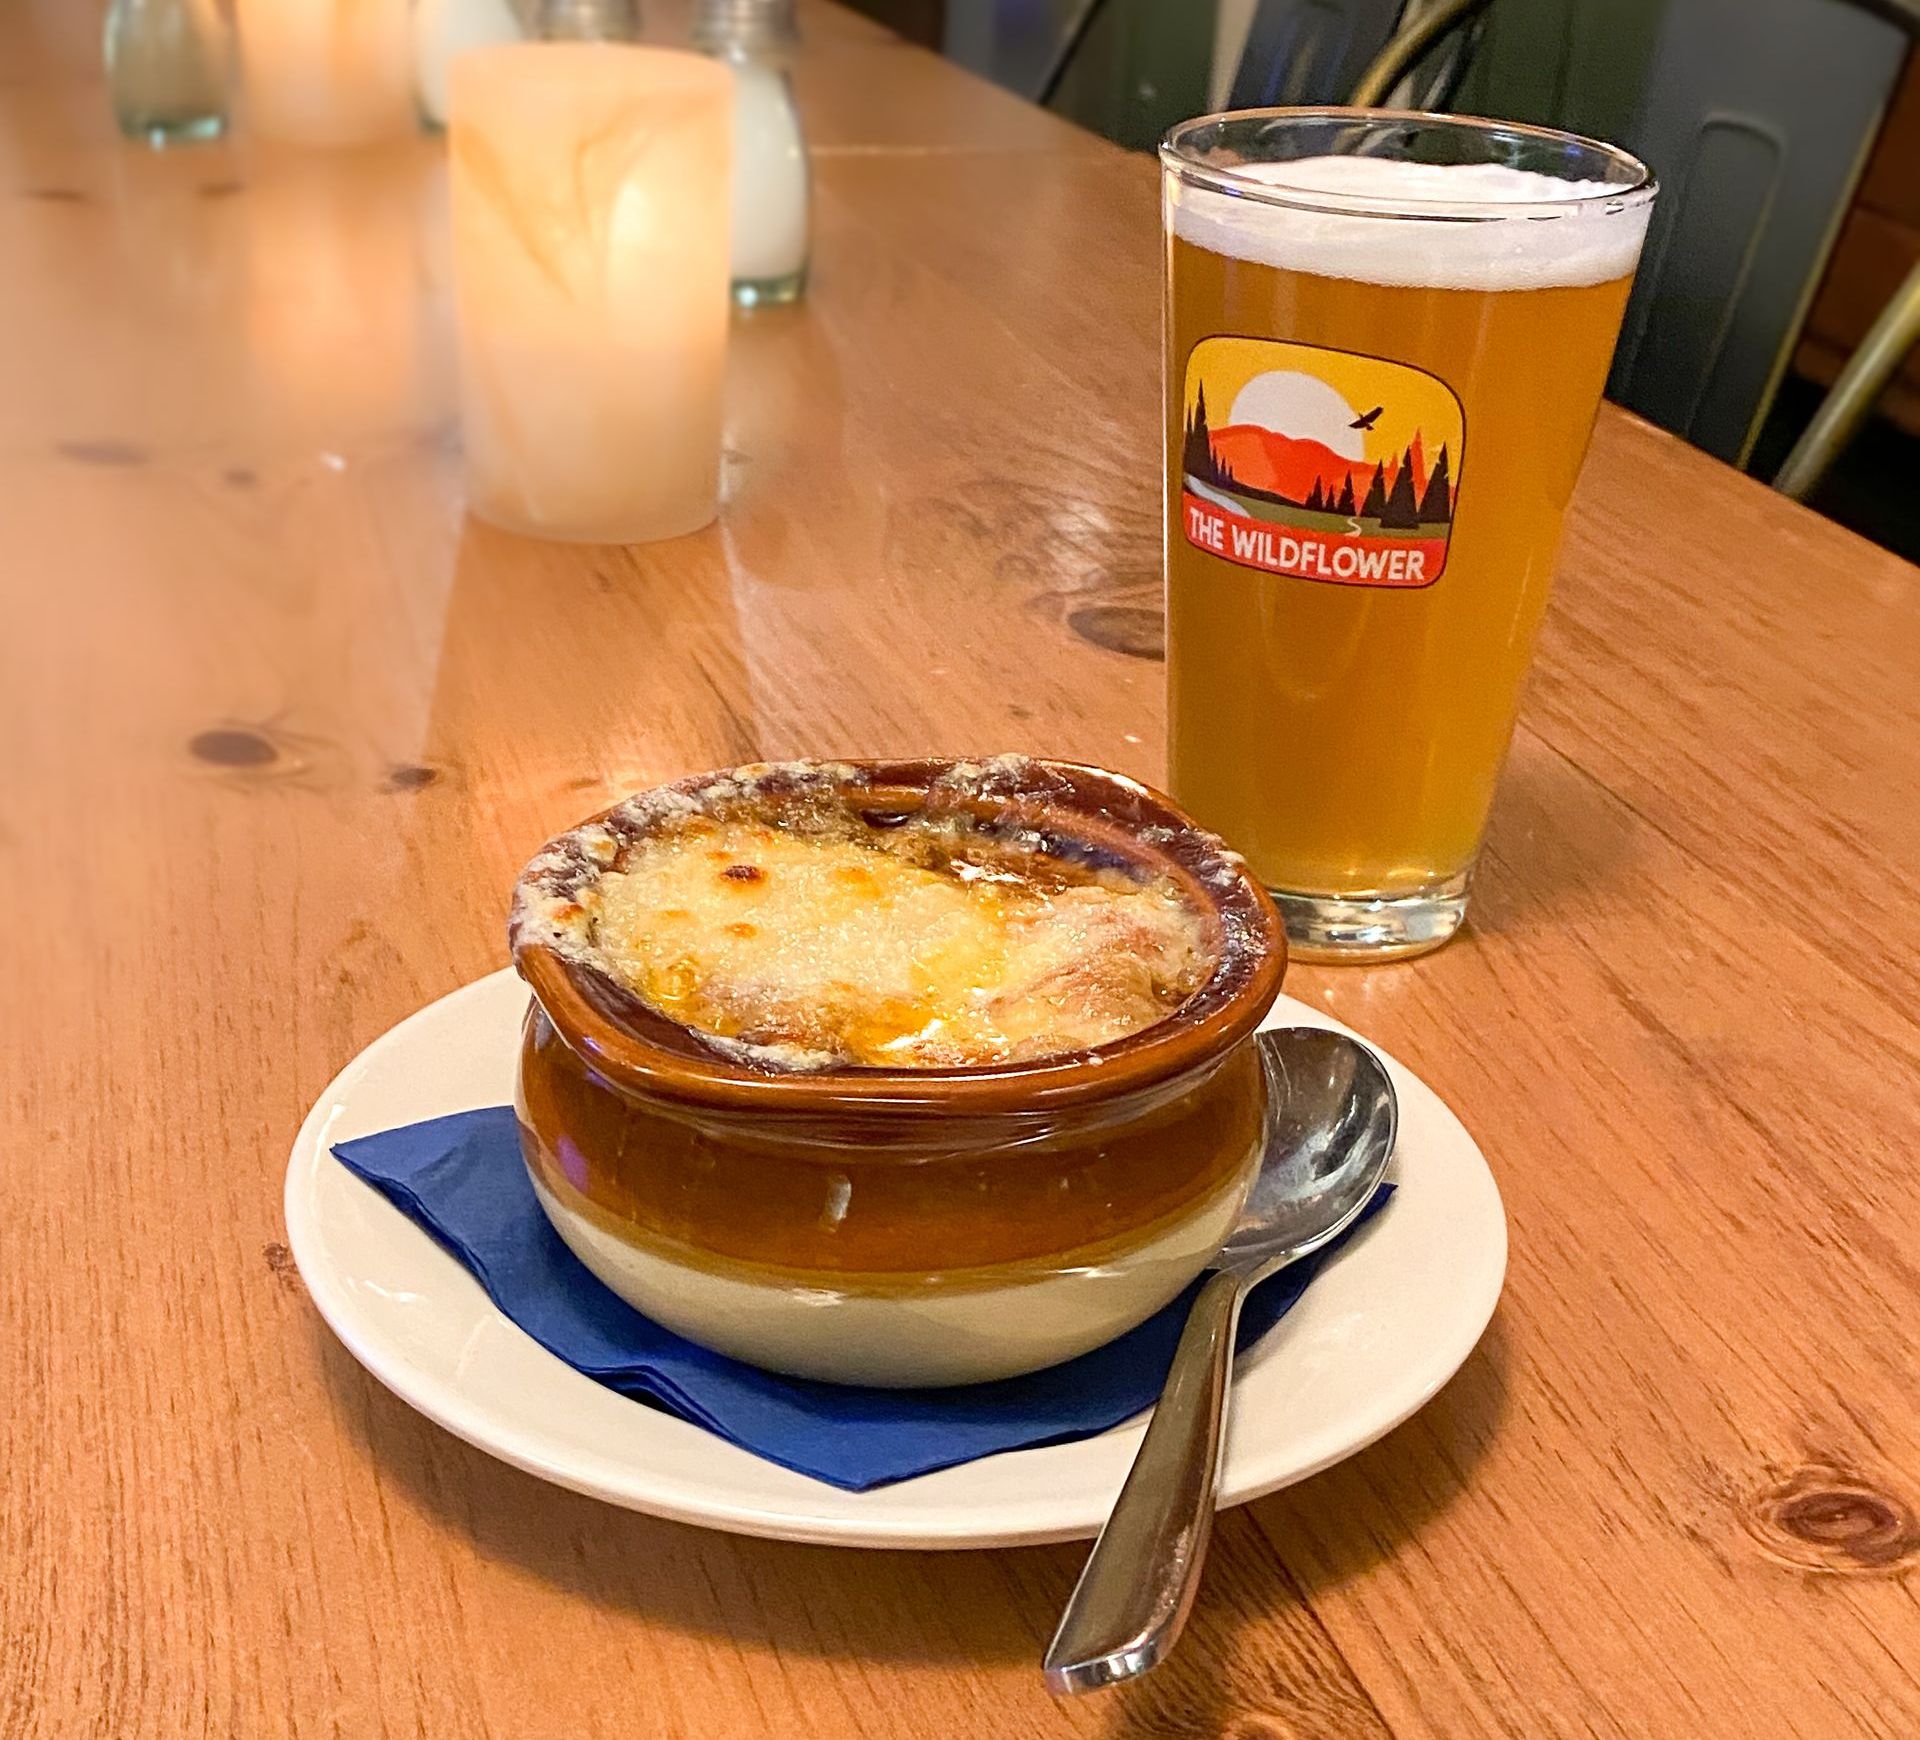 A bowl of  The Wildflower's French Onion Au Gratin soup and a glass of Beer.